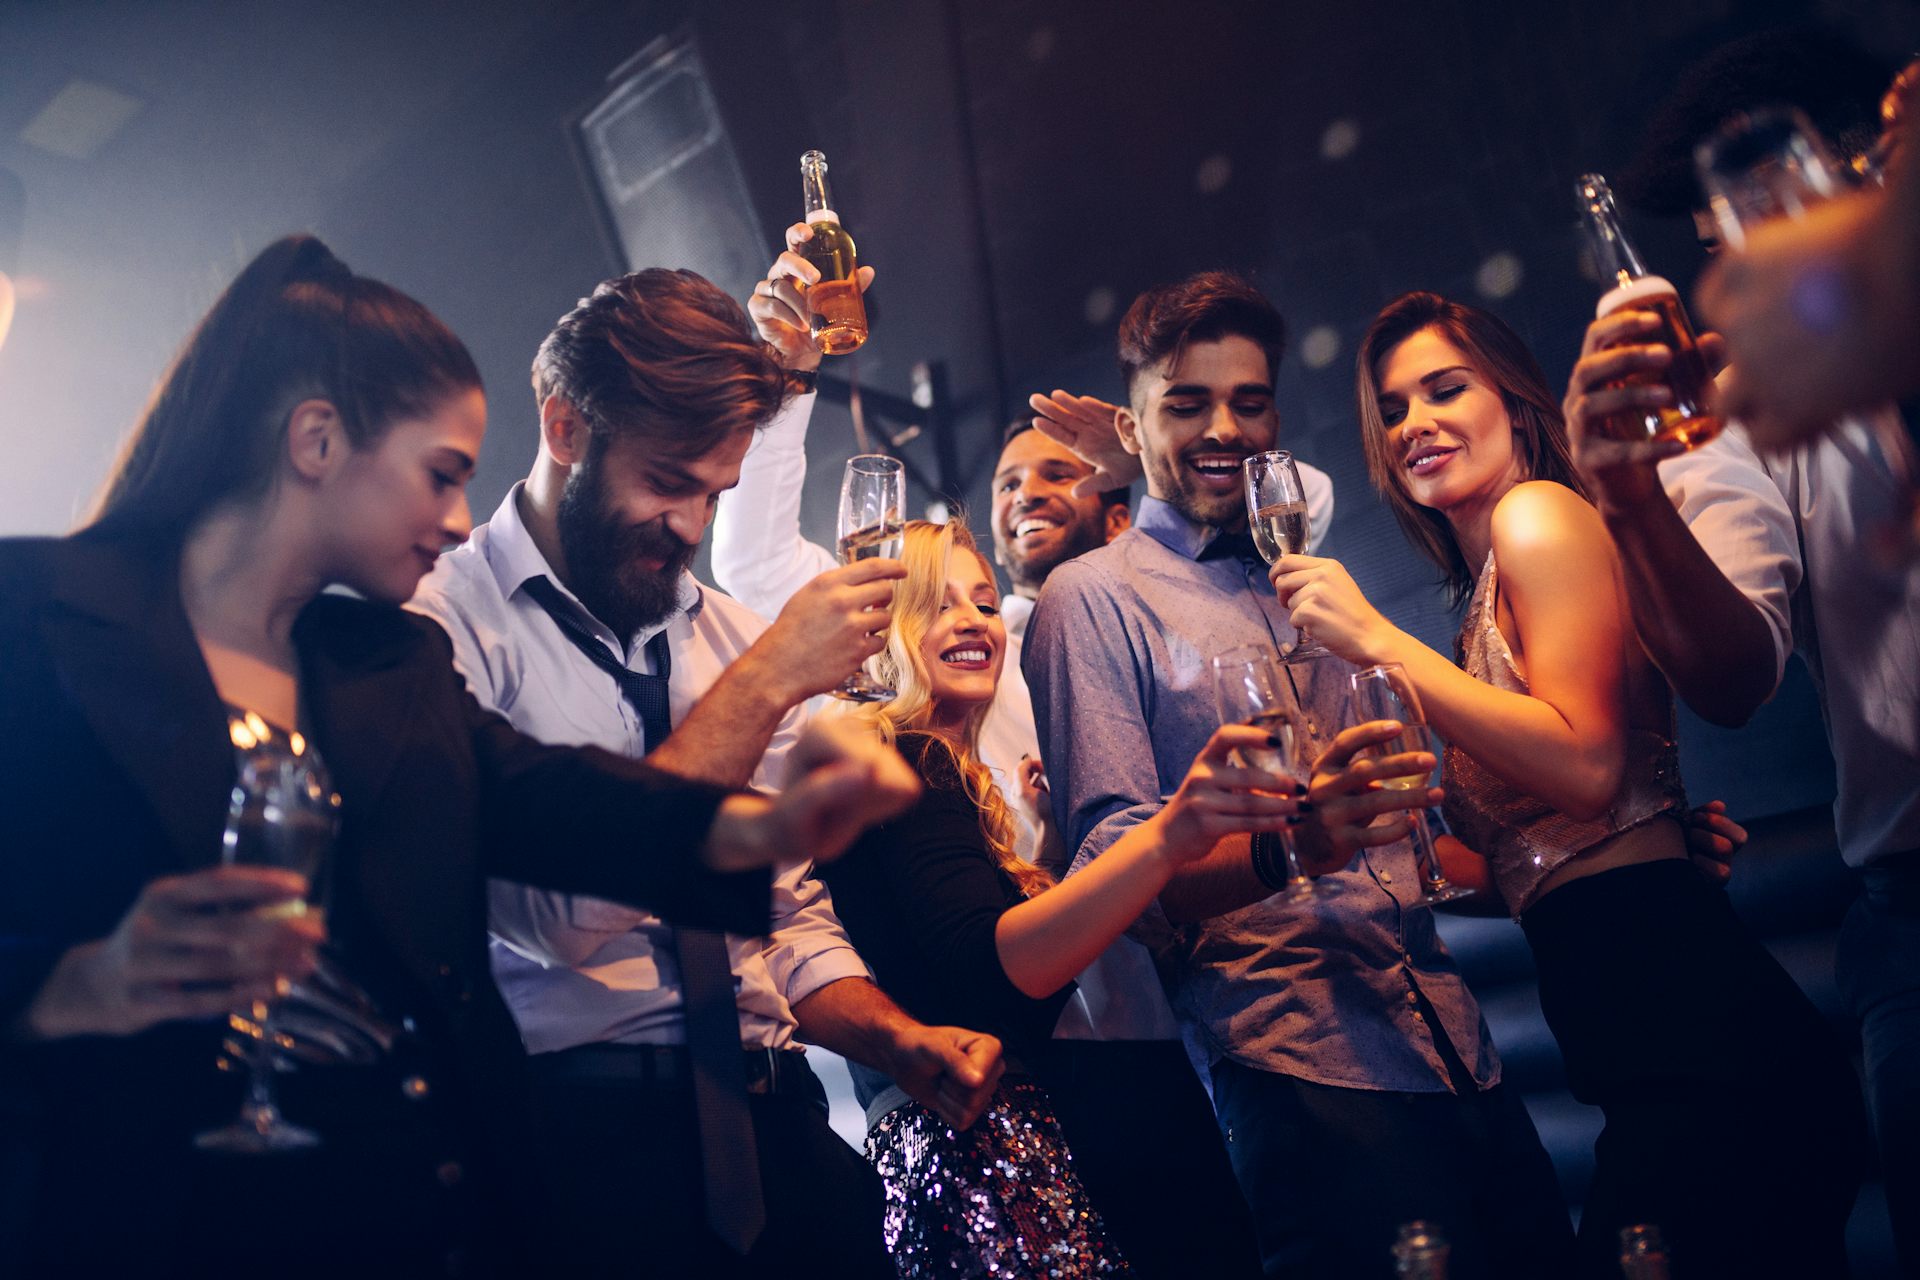 Groping, grinding, grabbing new research on nightclubs finds men do it often but know its wrong